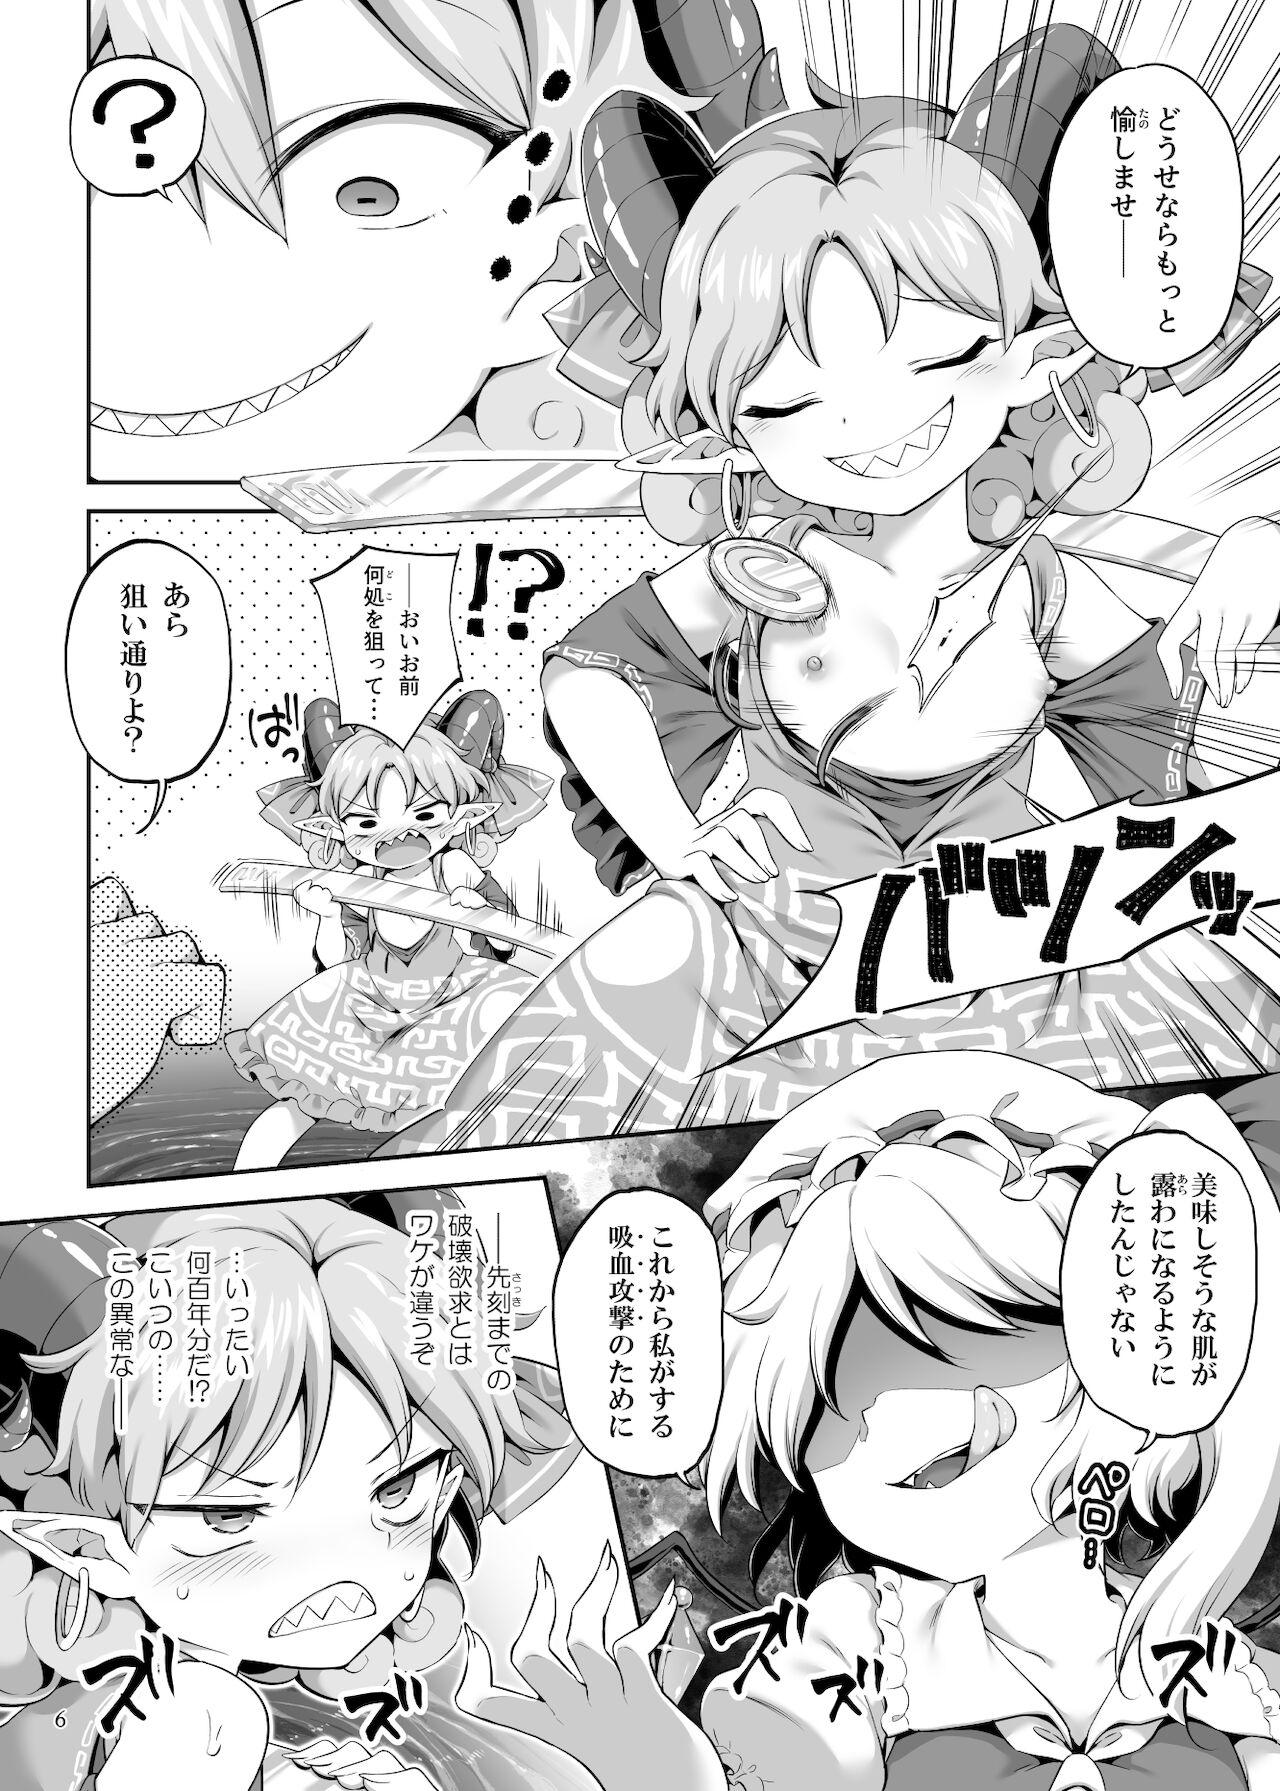 Joven 吸われて駄目なら吸ってみろ! - Touhou project Asslicking - Page 6